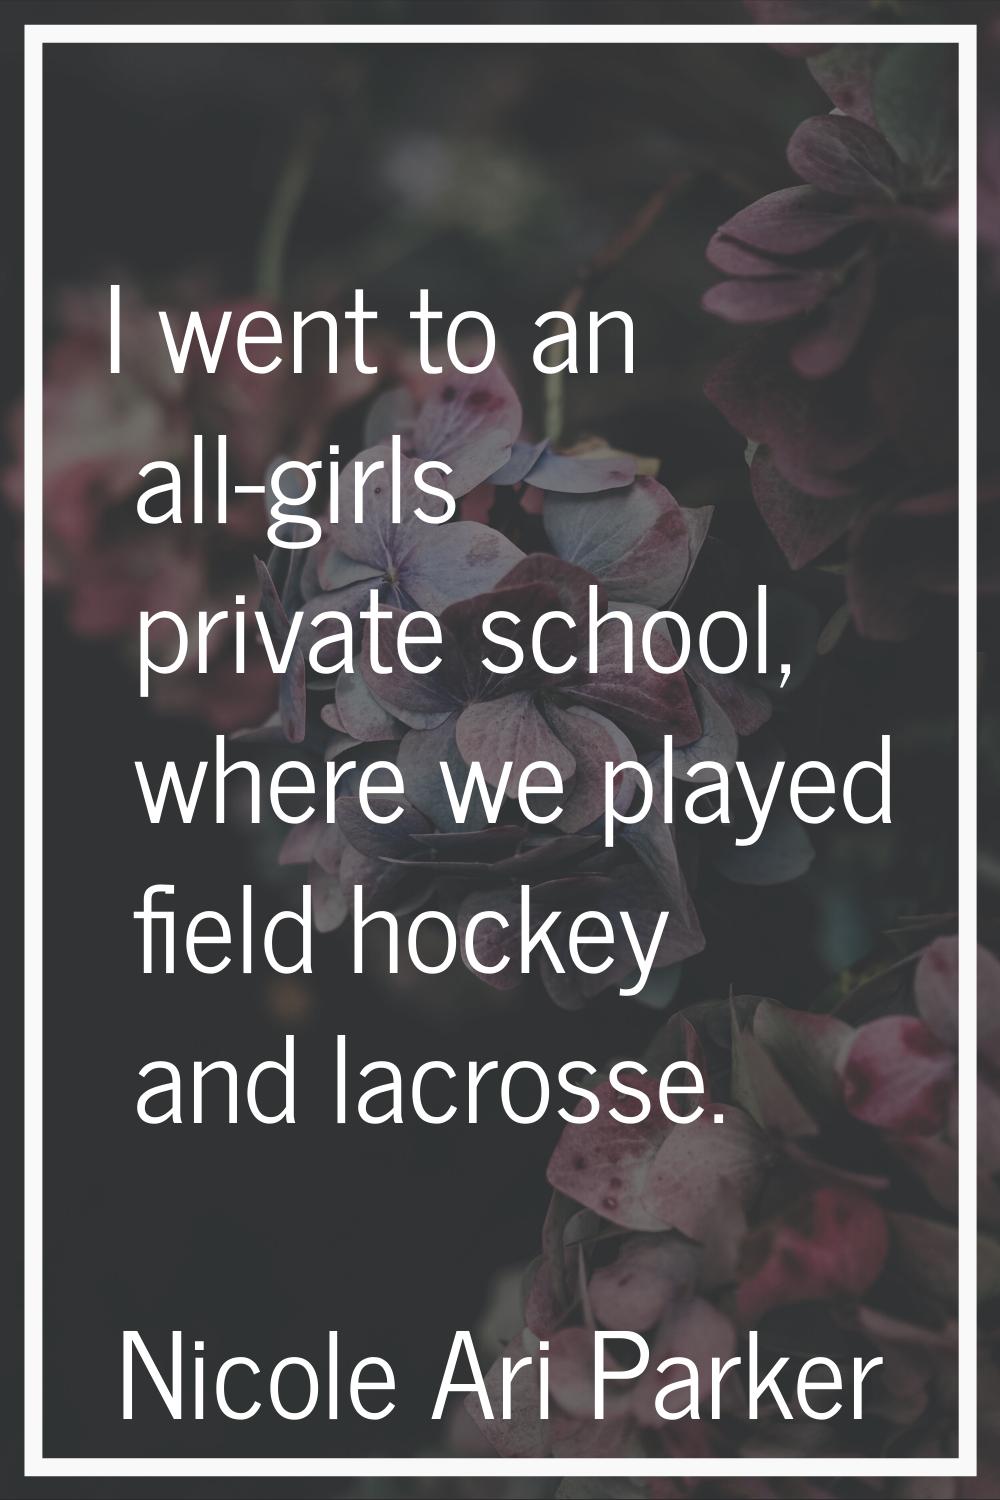 I went to an all-girls private school, where we played field hockey and lacrosse.